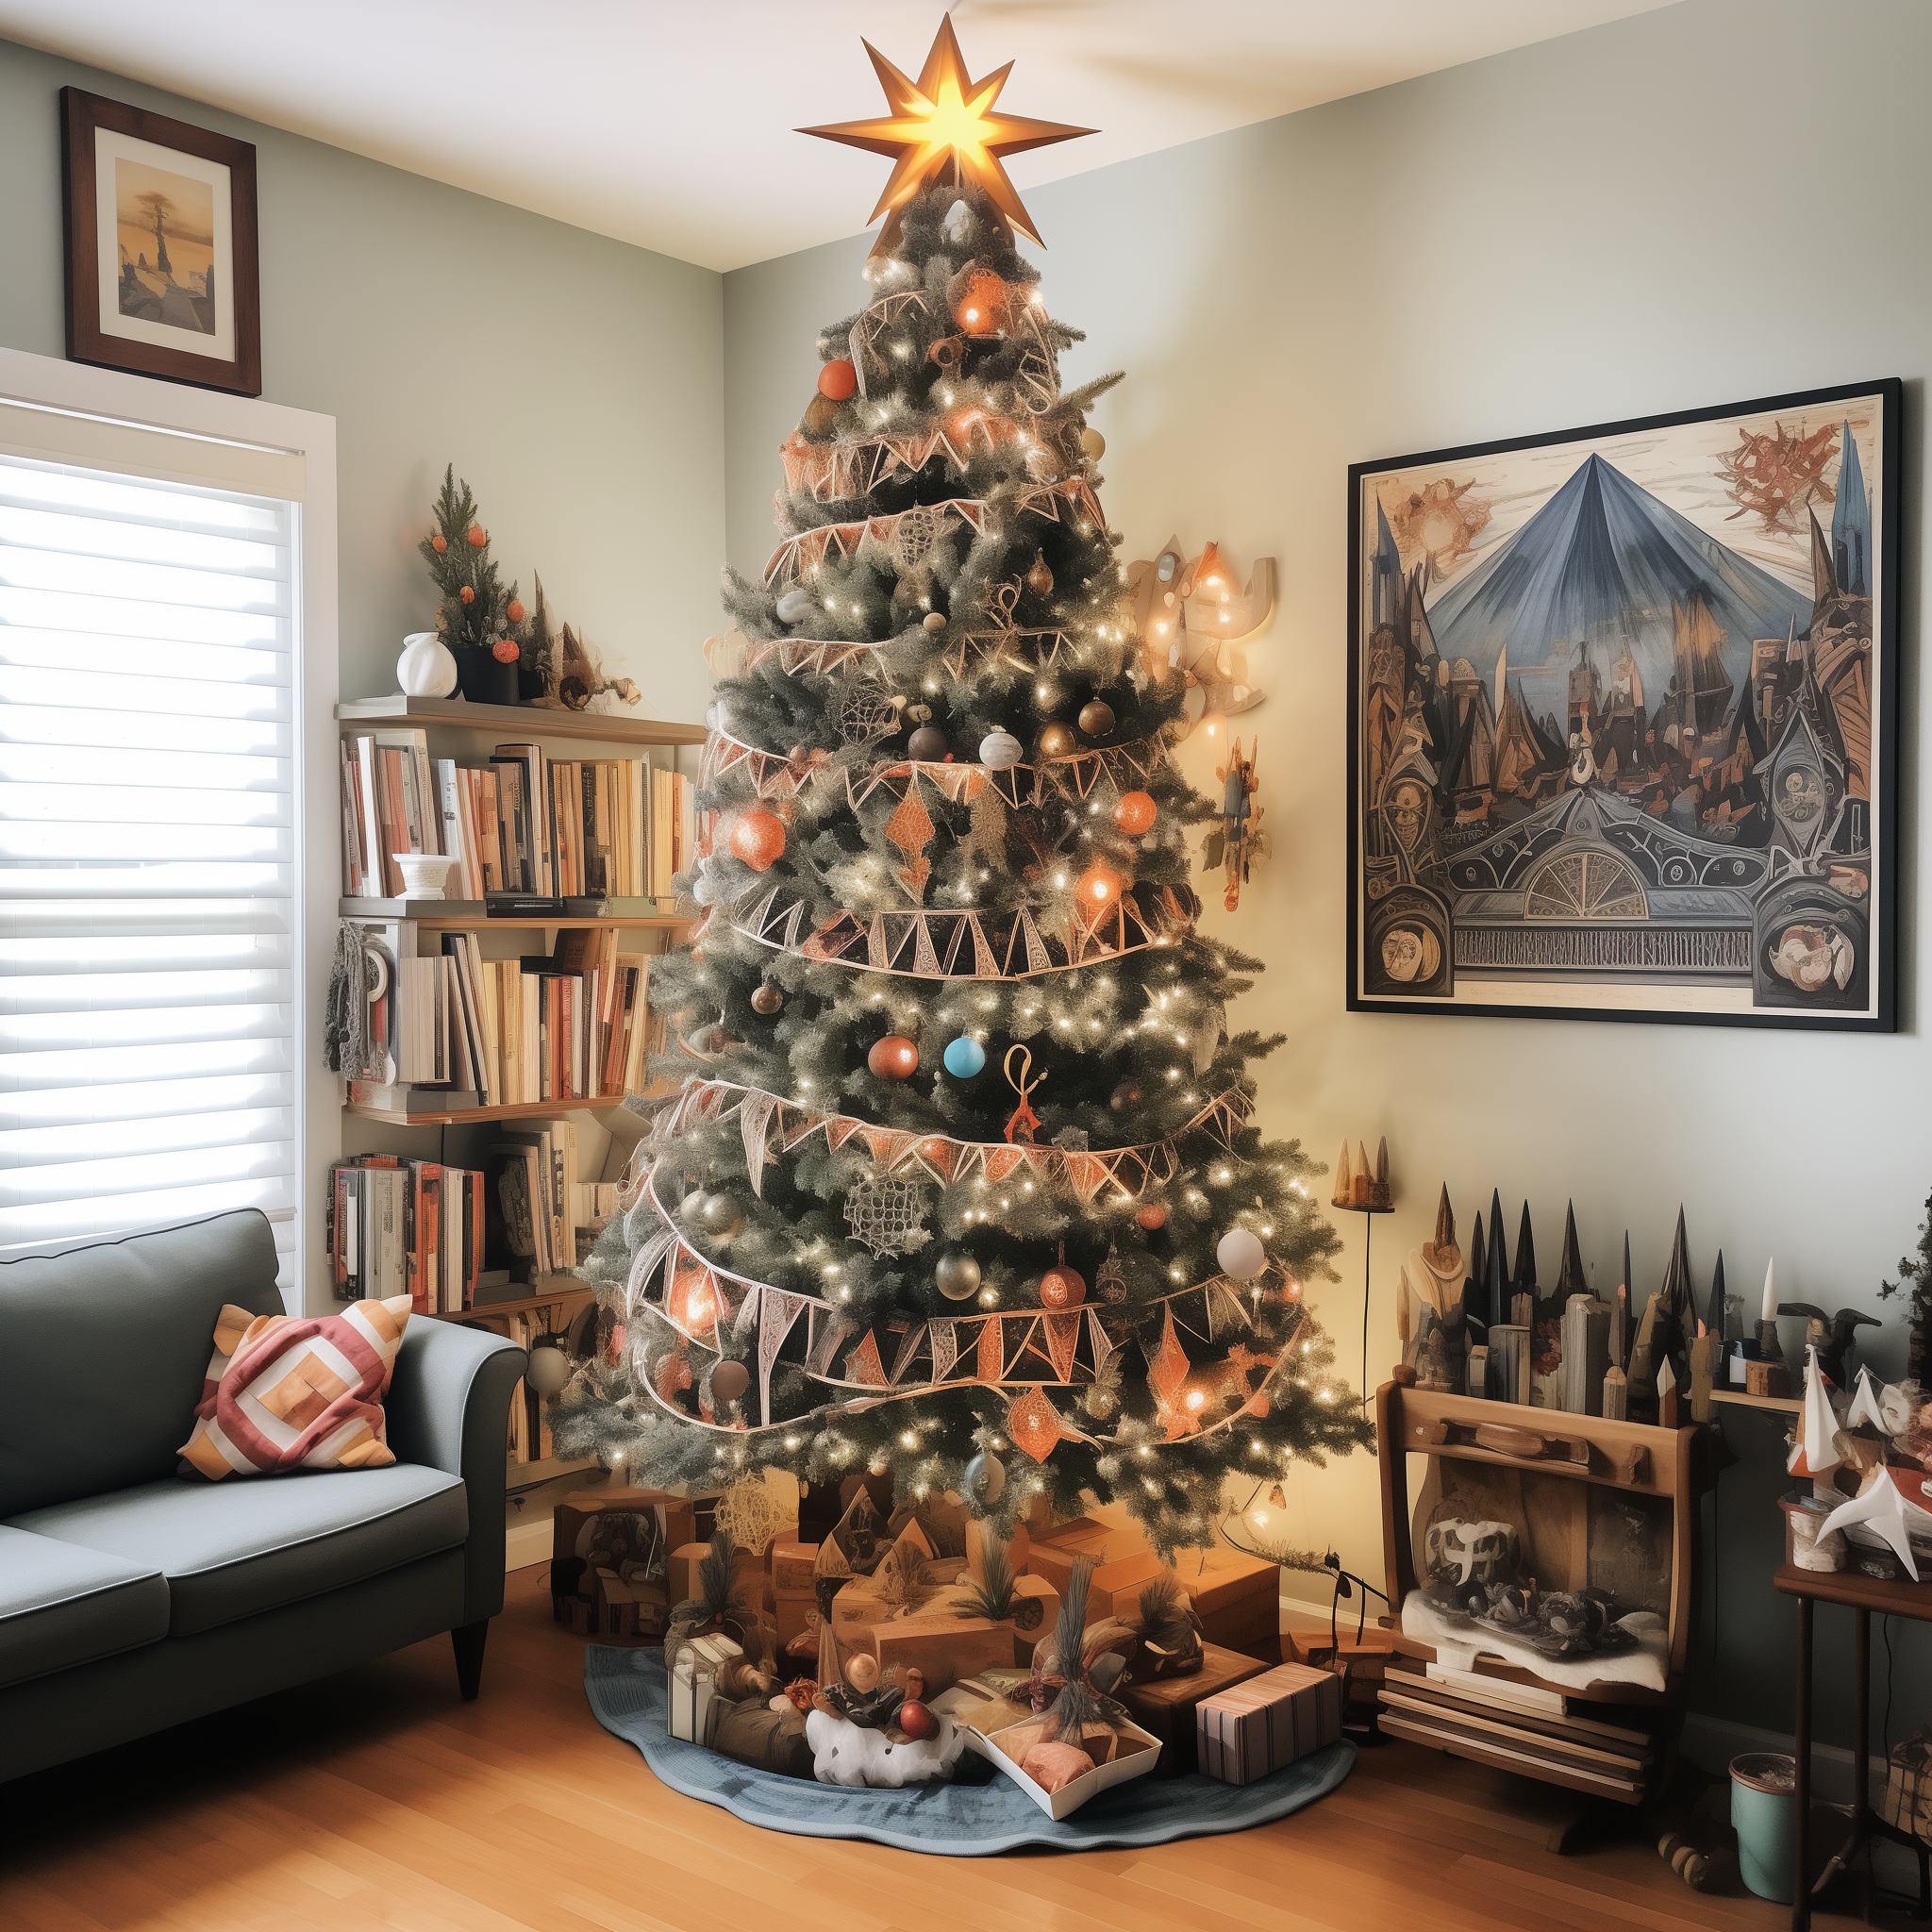 A Christmas tree near a bookshelf that&#x27;s covered in soft, warm lights, tiny ornaments, and a garland all around with a star topper and some small presents underneath it